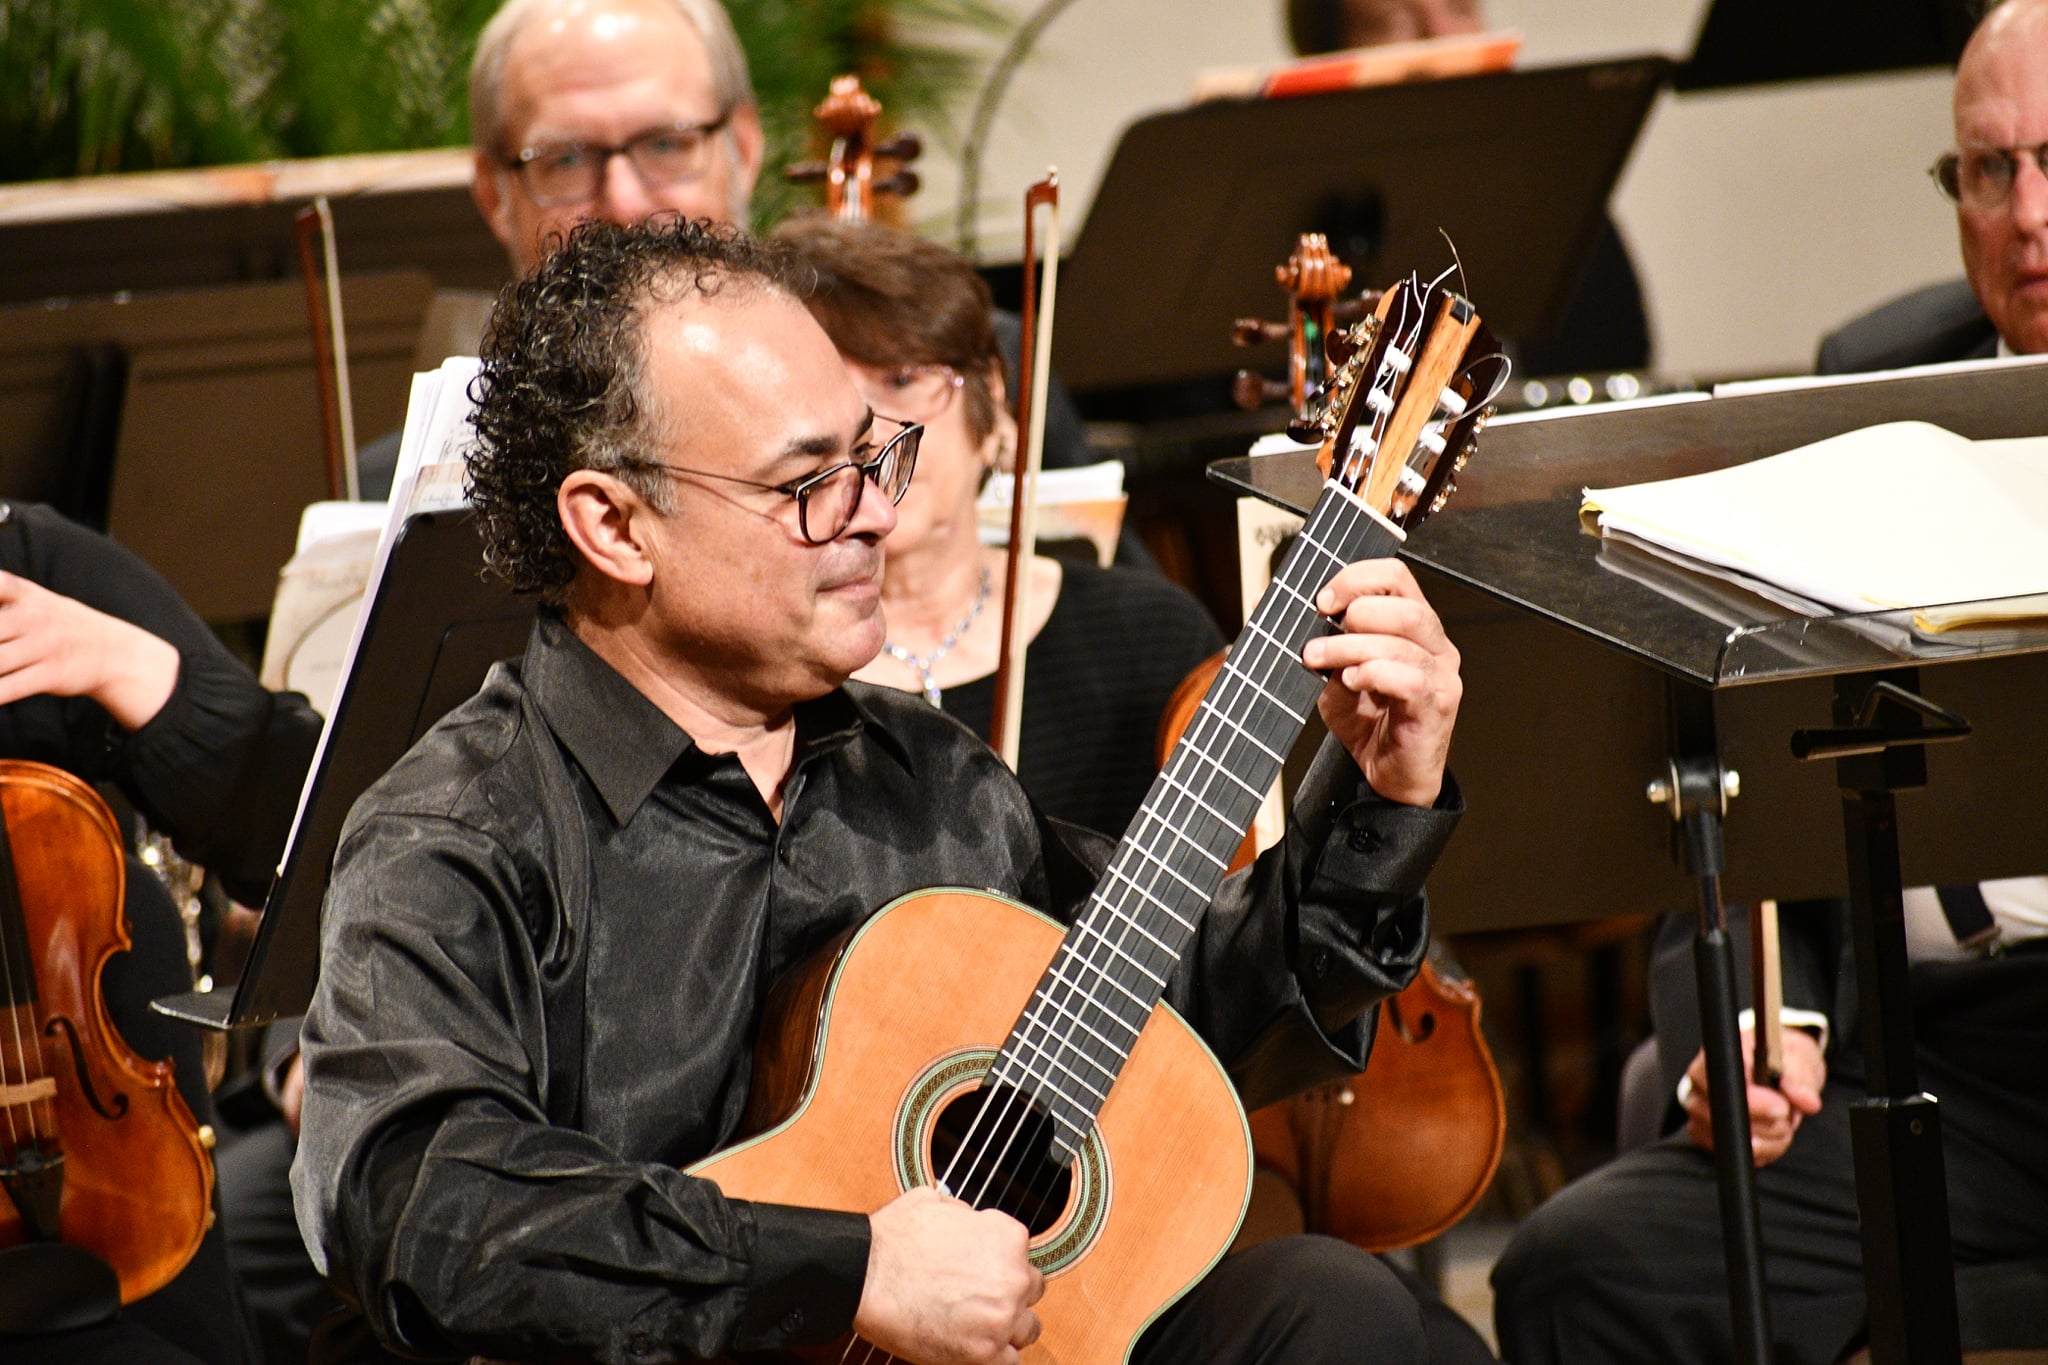 The Alhambra Orchestra with Soloist Guitarist Rafael Padrón